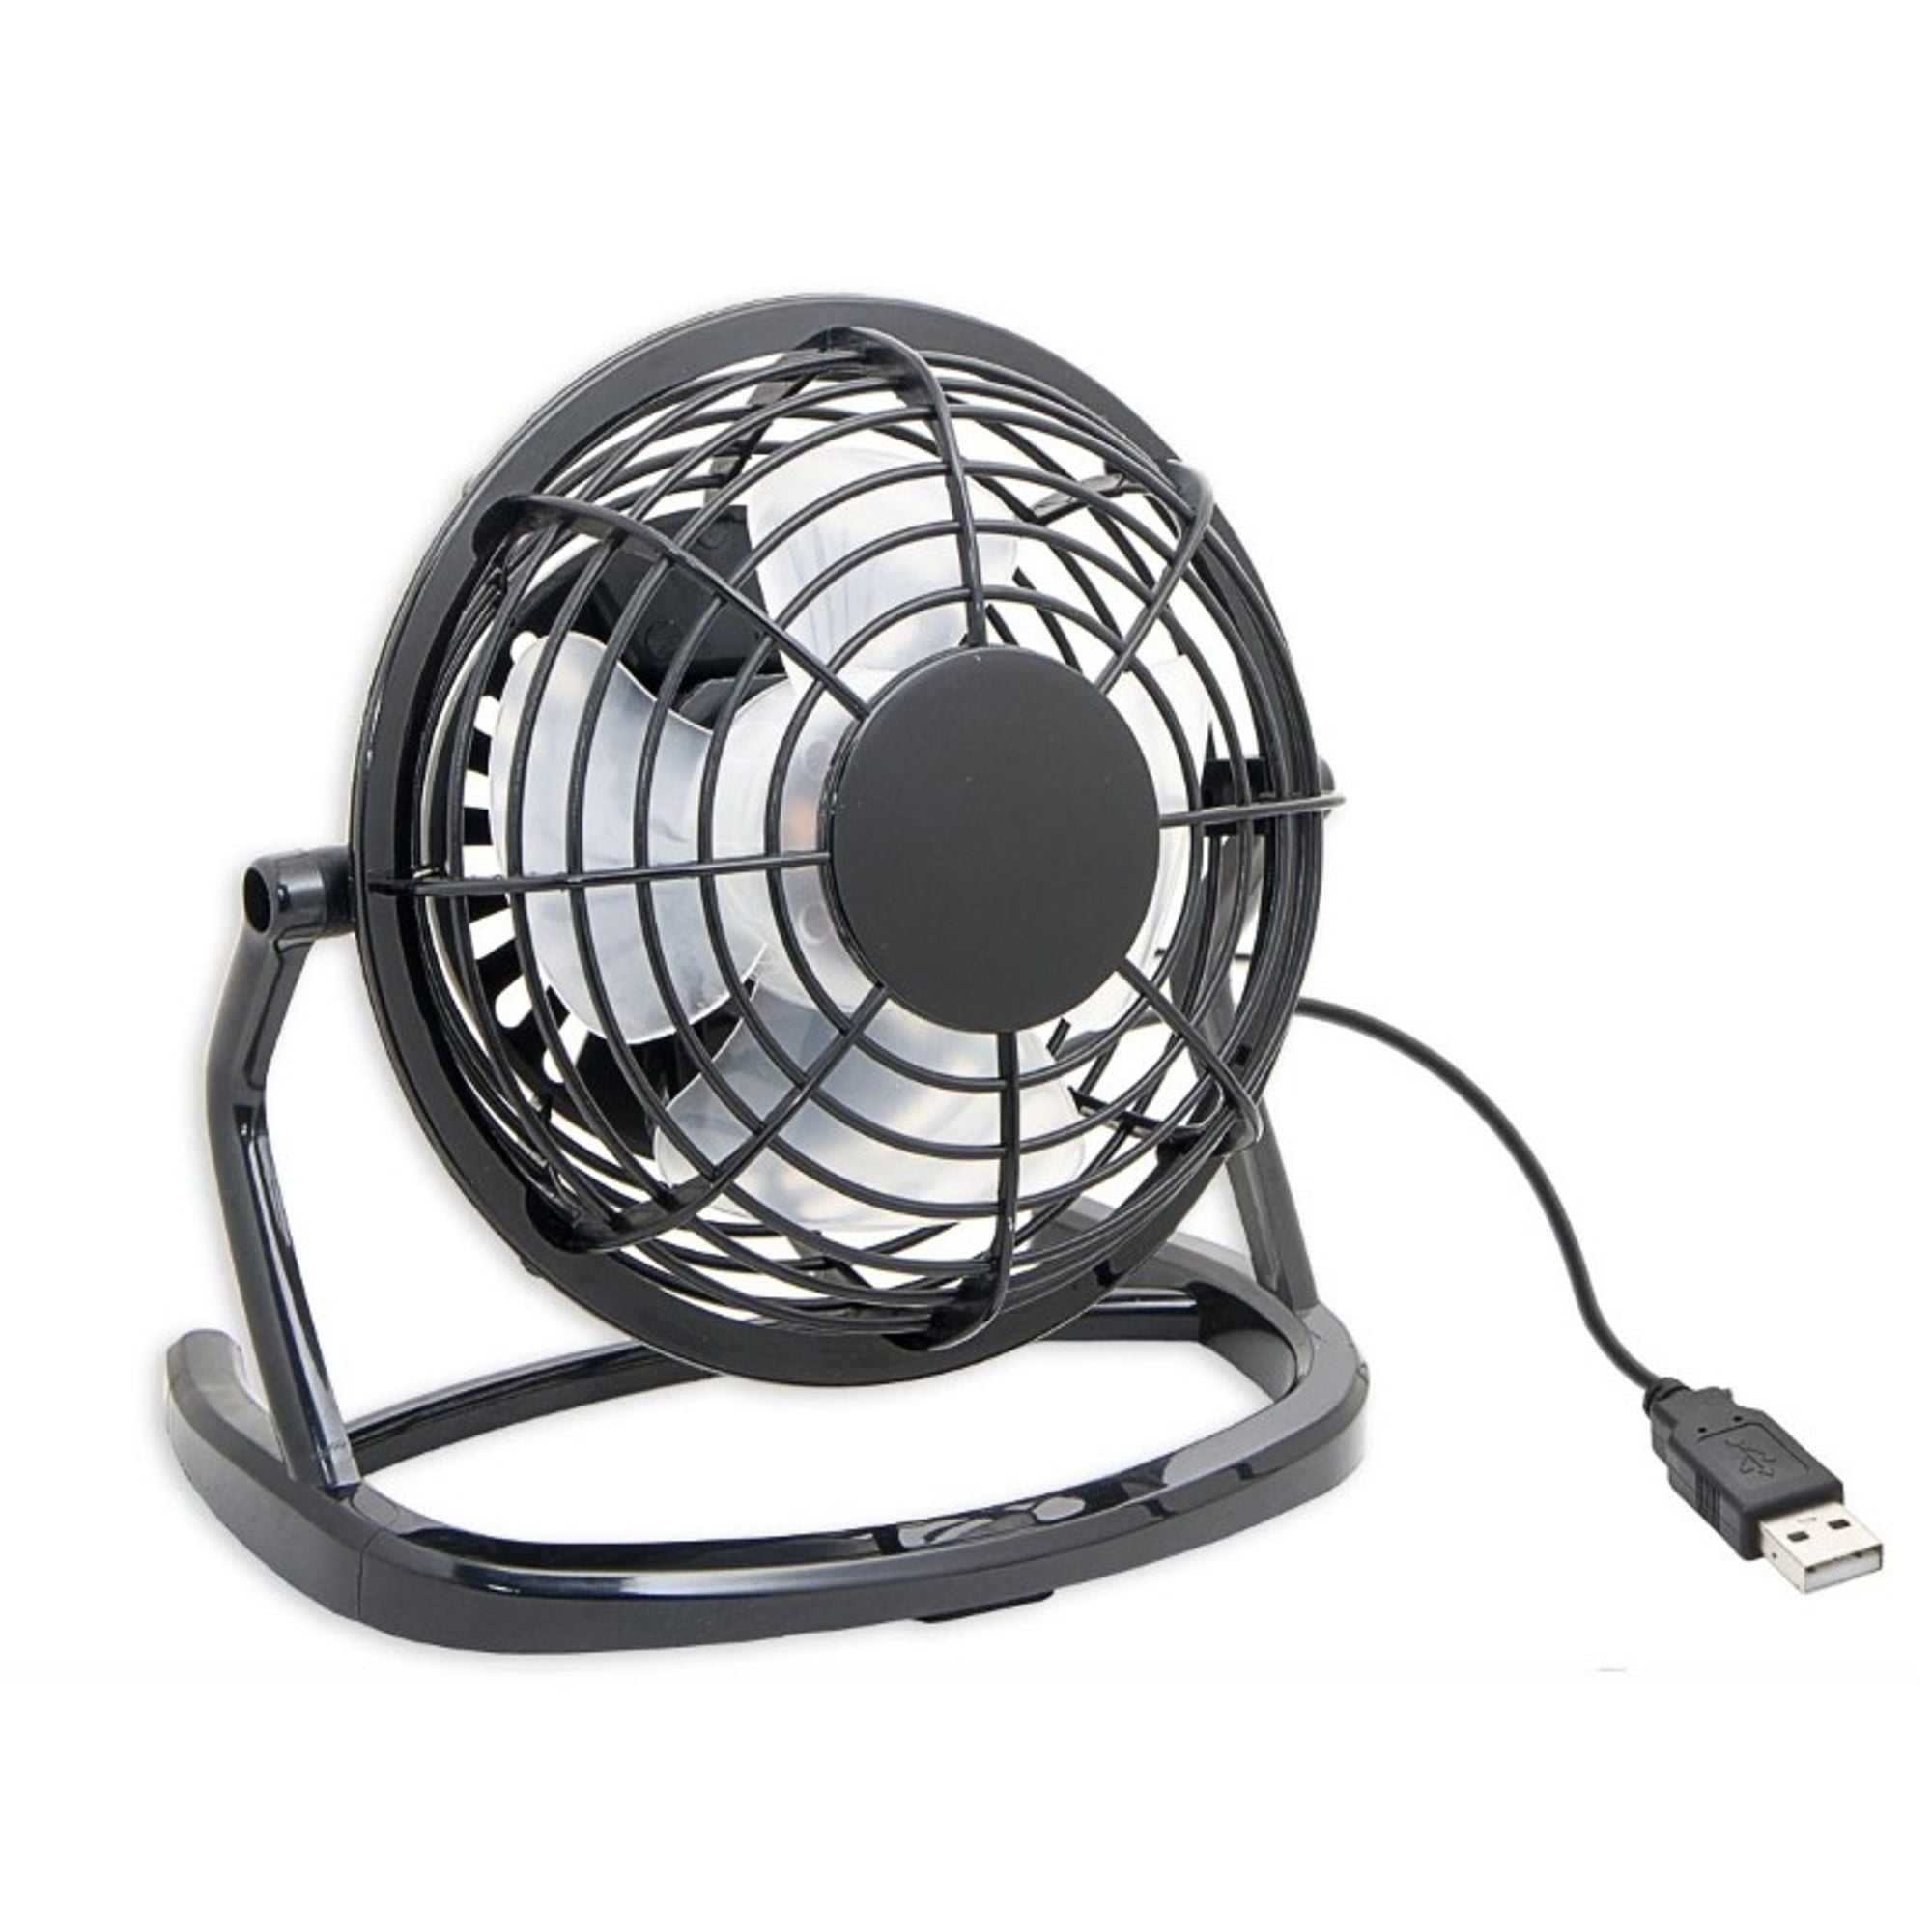 Office ?Mini USB Fan Maserfaliw Mini Portable Quiet USB Desk Handheld Fan Home Office Electric Table Air Cooler Holiday Gifts. Home Life Blue 